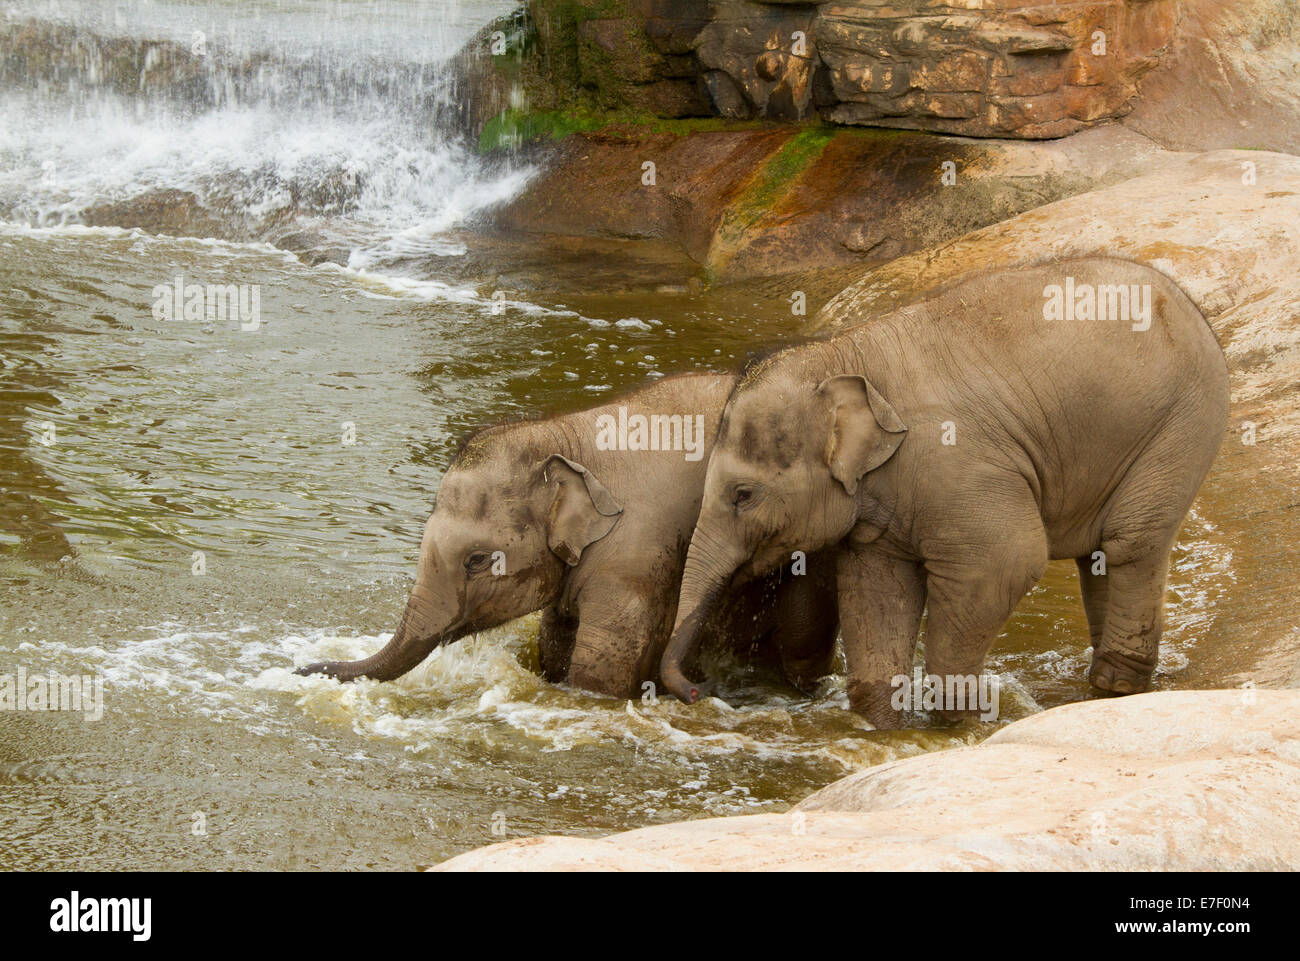 Two young Asian elephants playing in large pool of running water Stock Photo